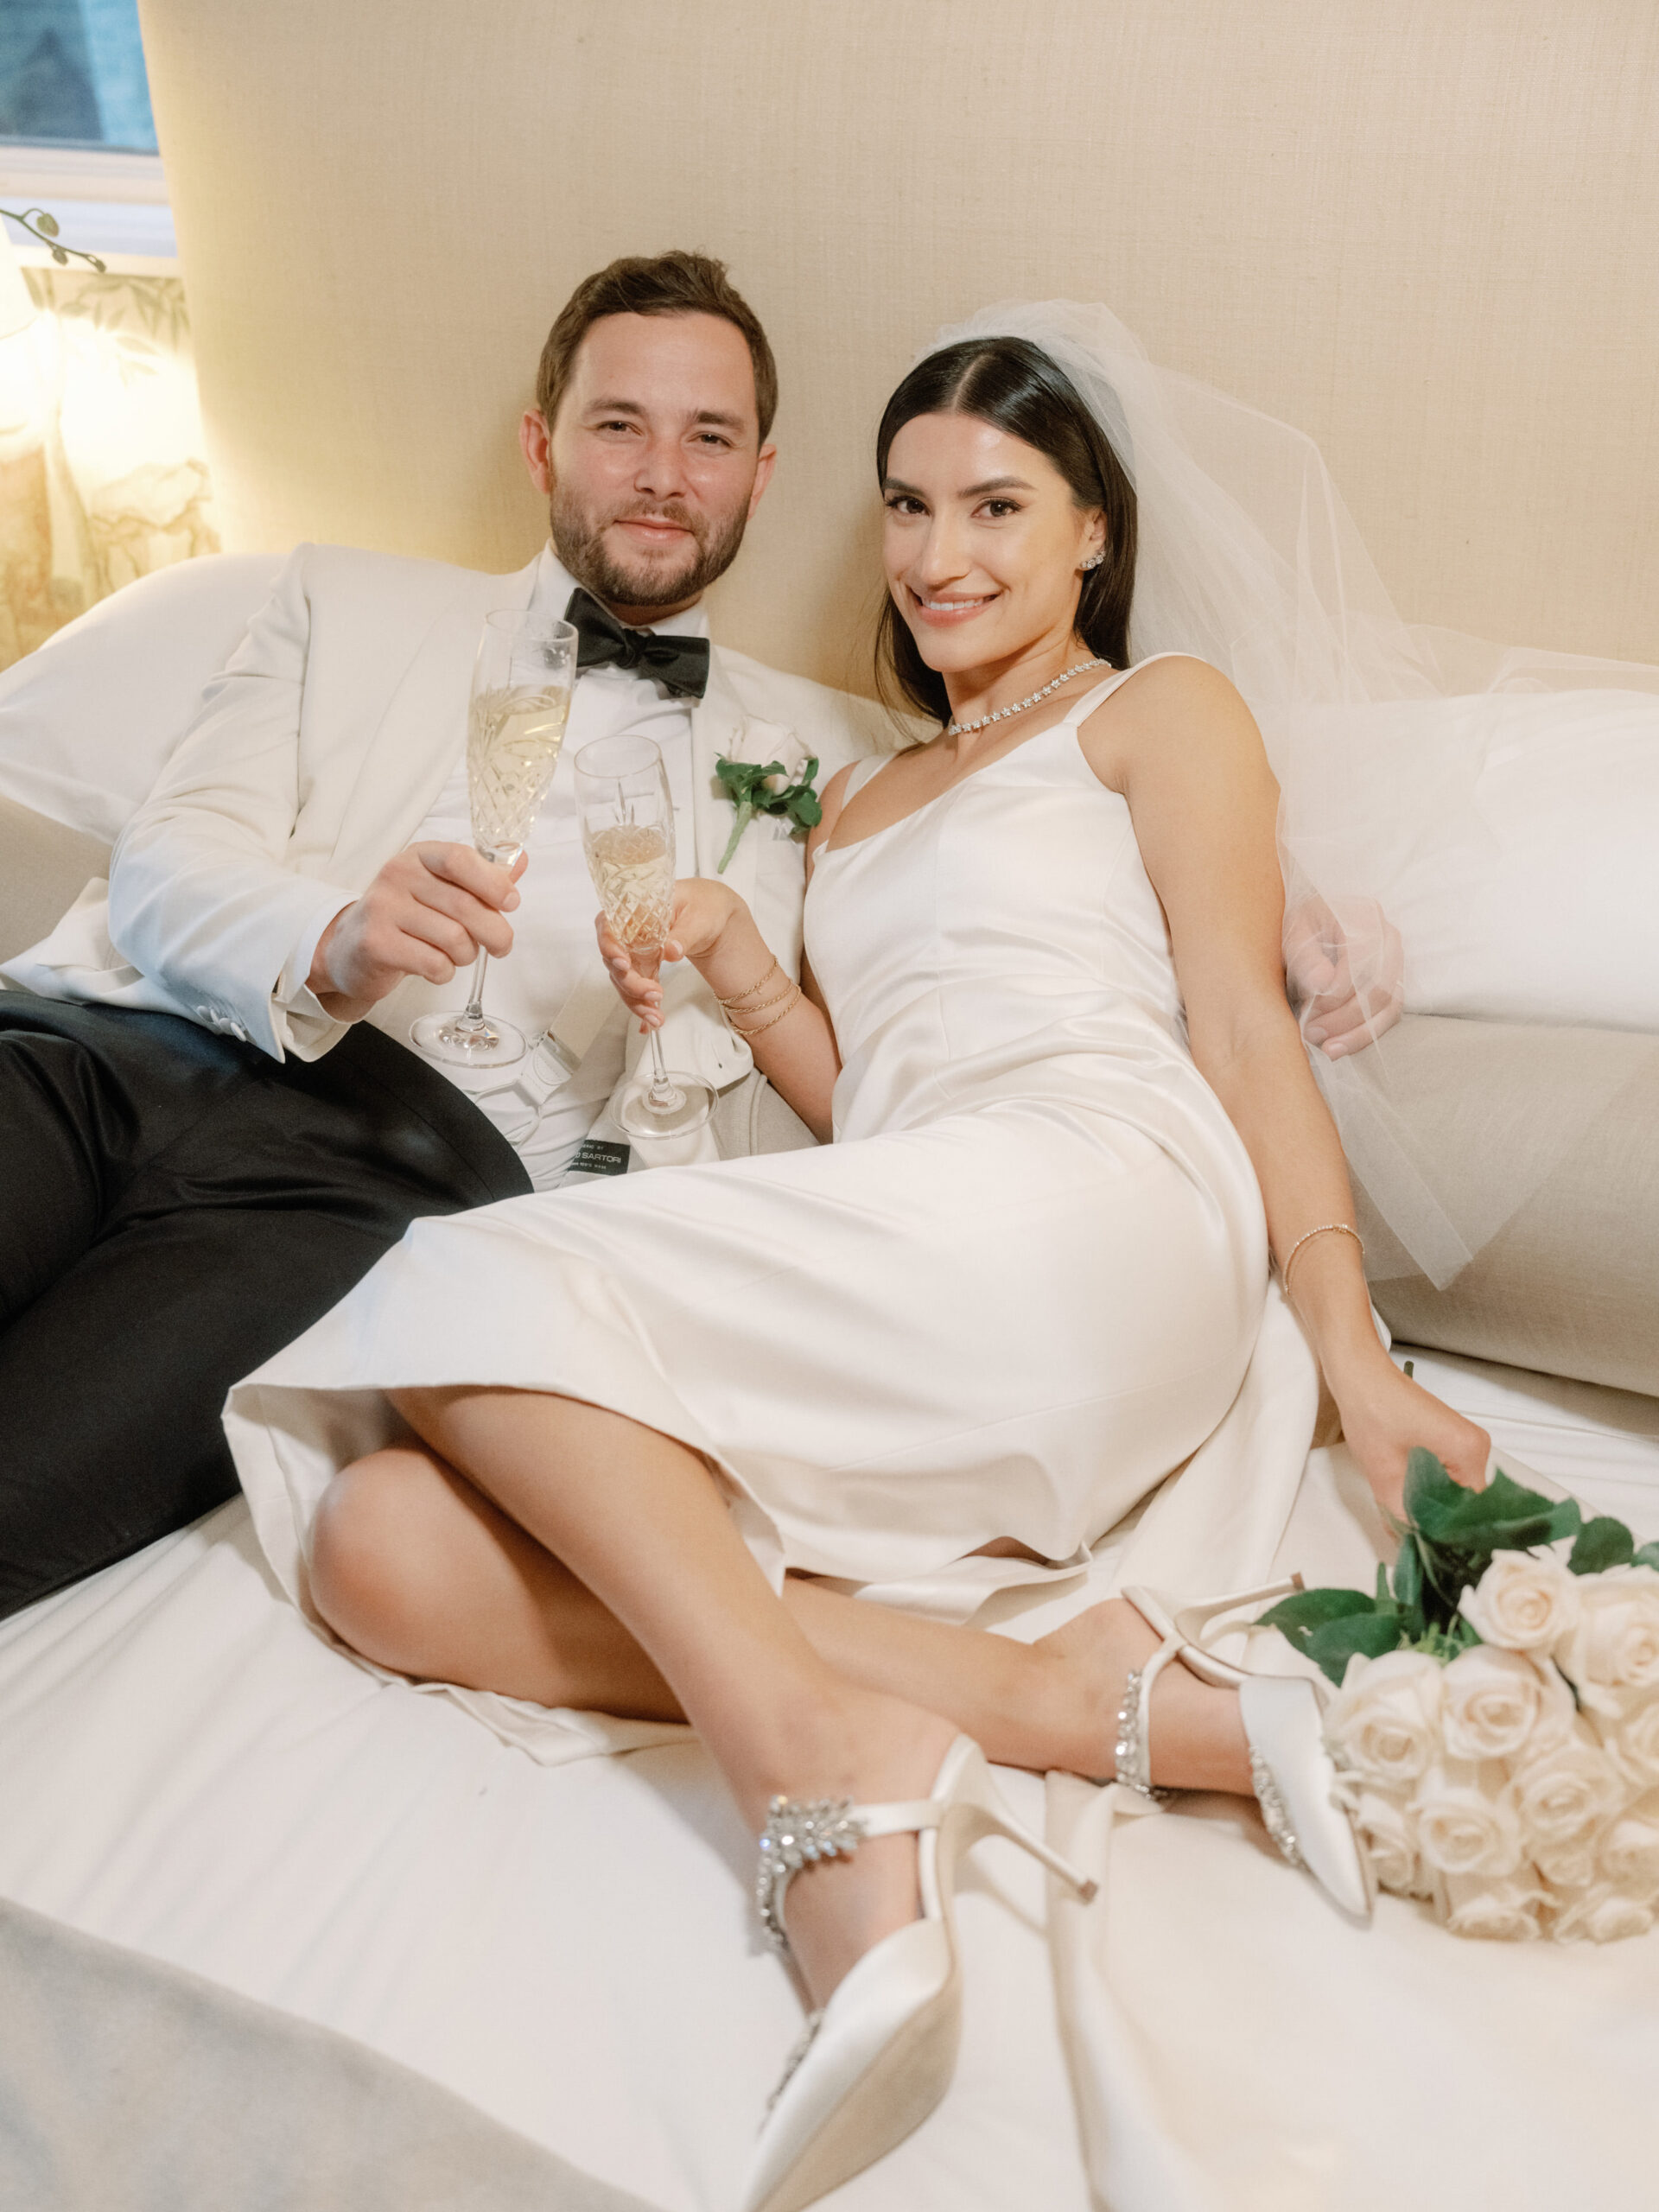 The newlyweds are lying on the bed, holding glasses of champagnes. Timeless Wedding Photography image by Jenny Fu Studio